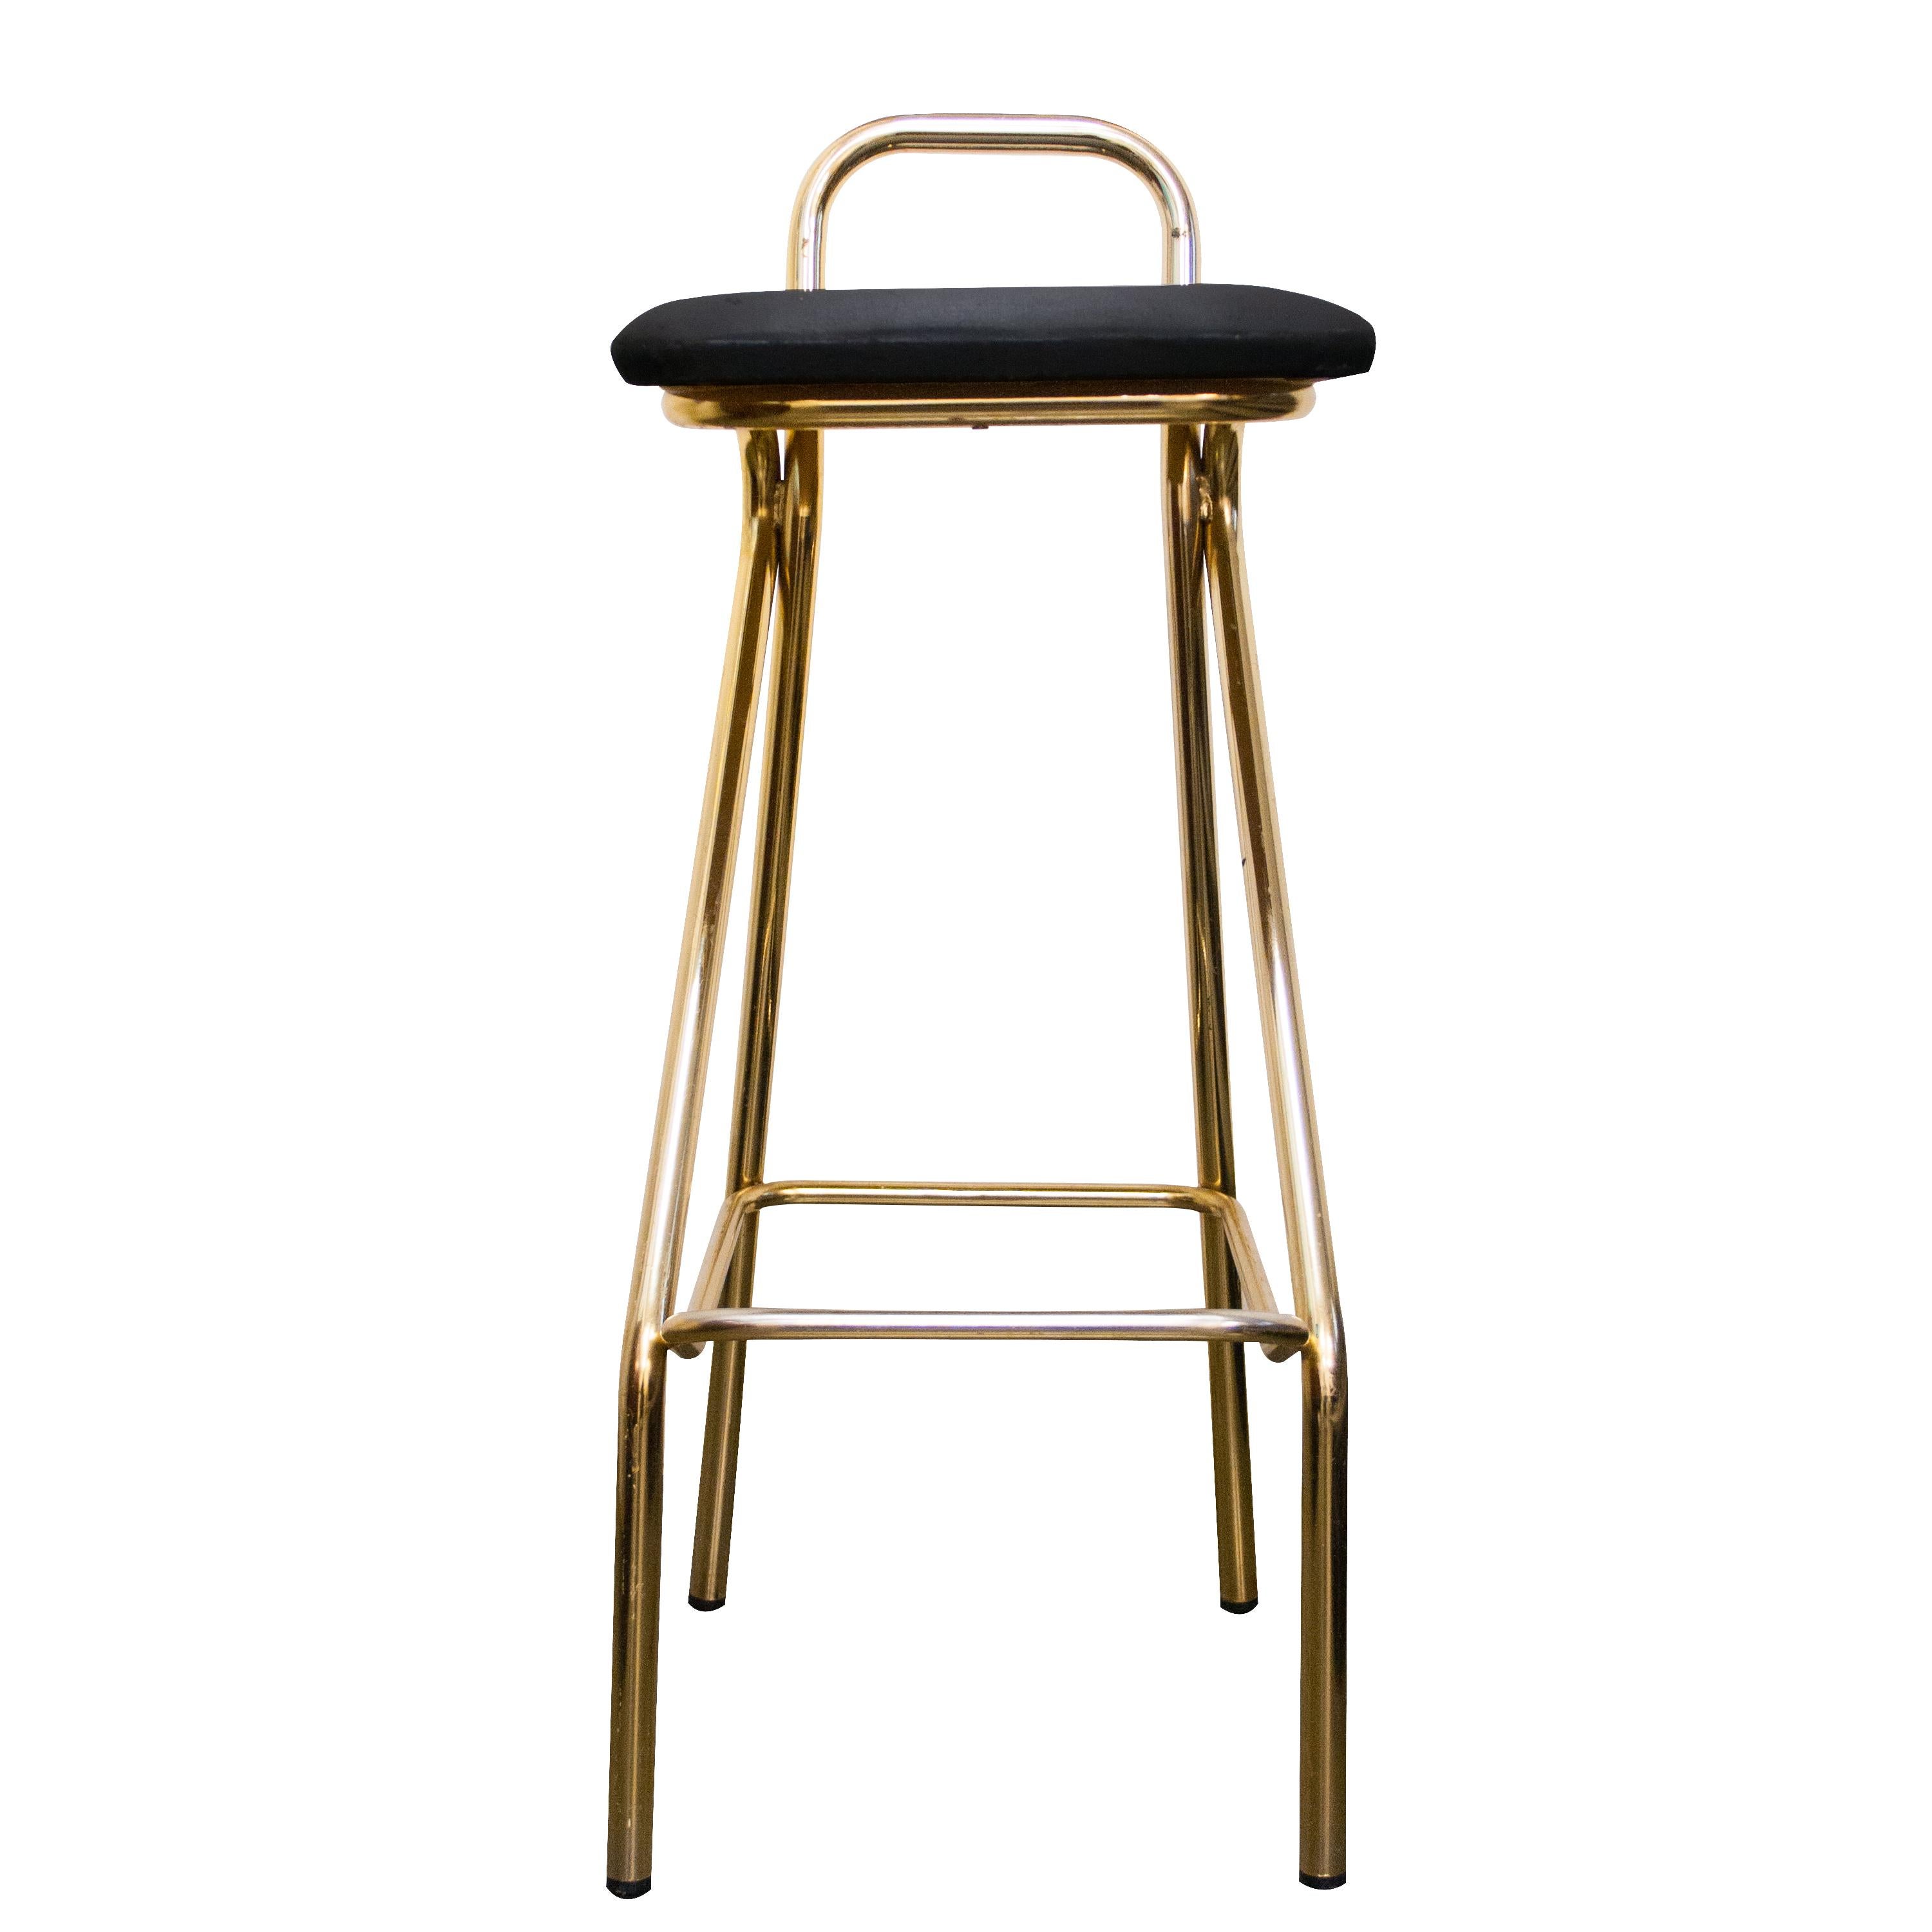 Pair of Italian bar stools with golden chrome metal tubular structure with black leather upholstered seating.
    